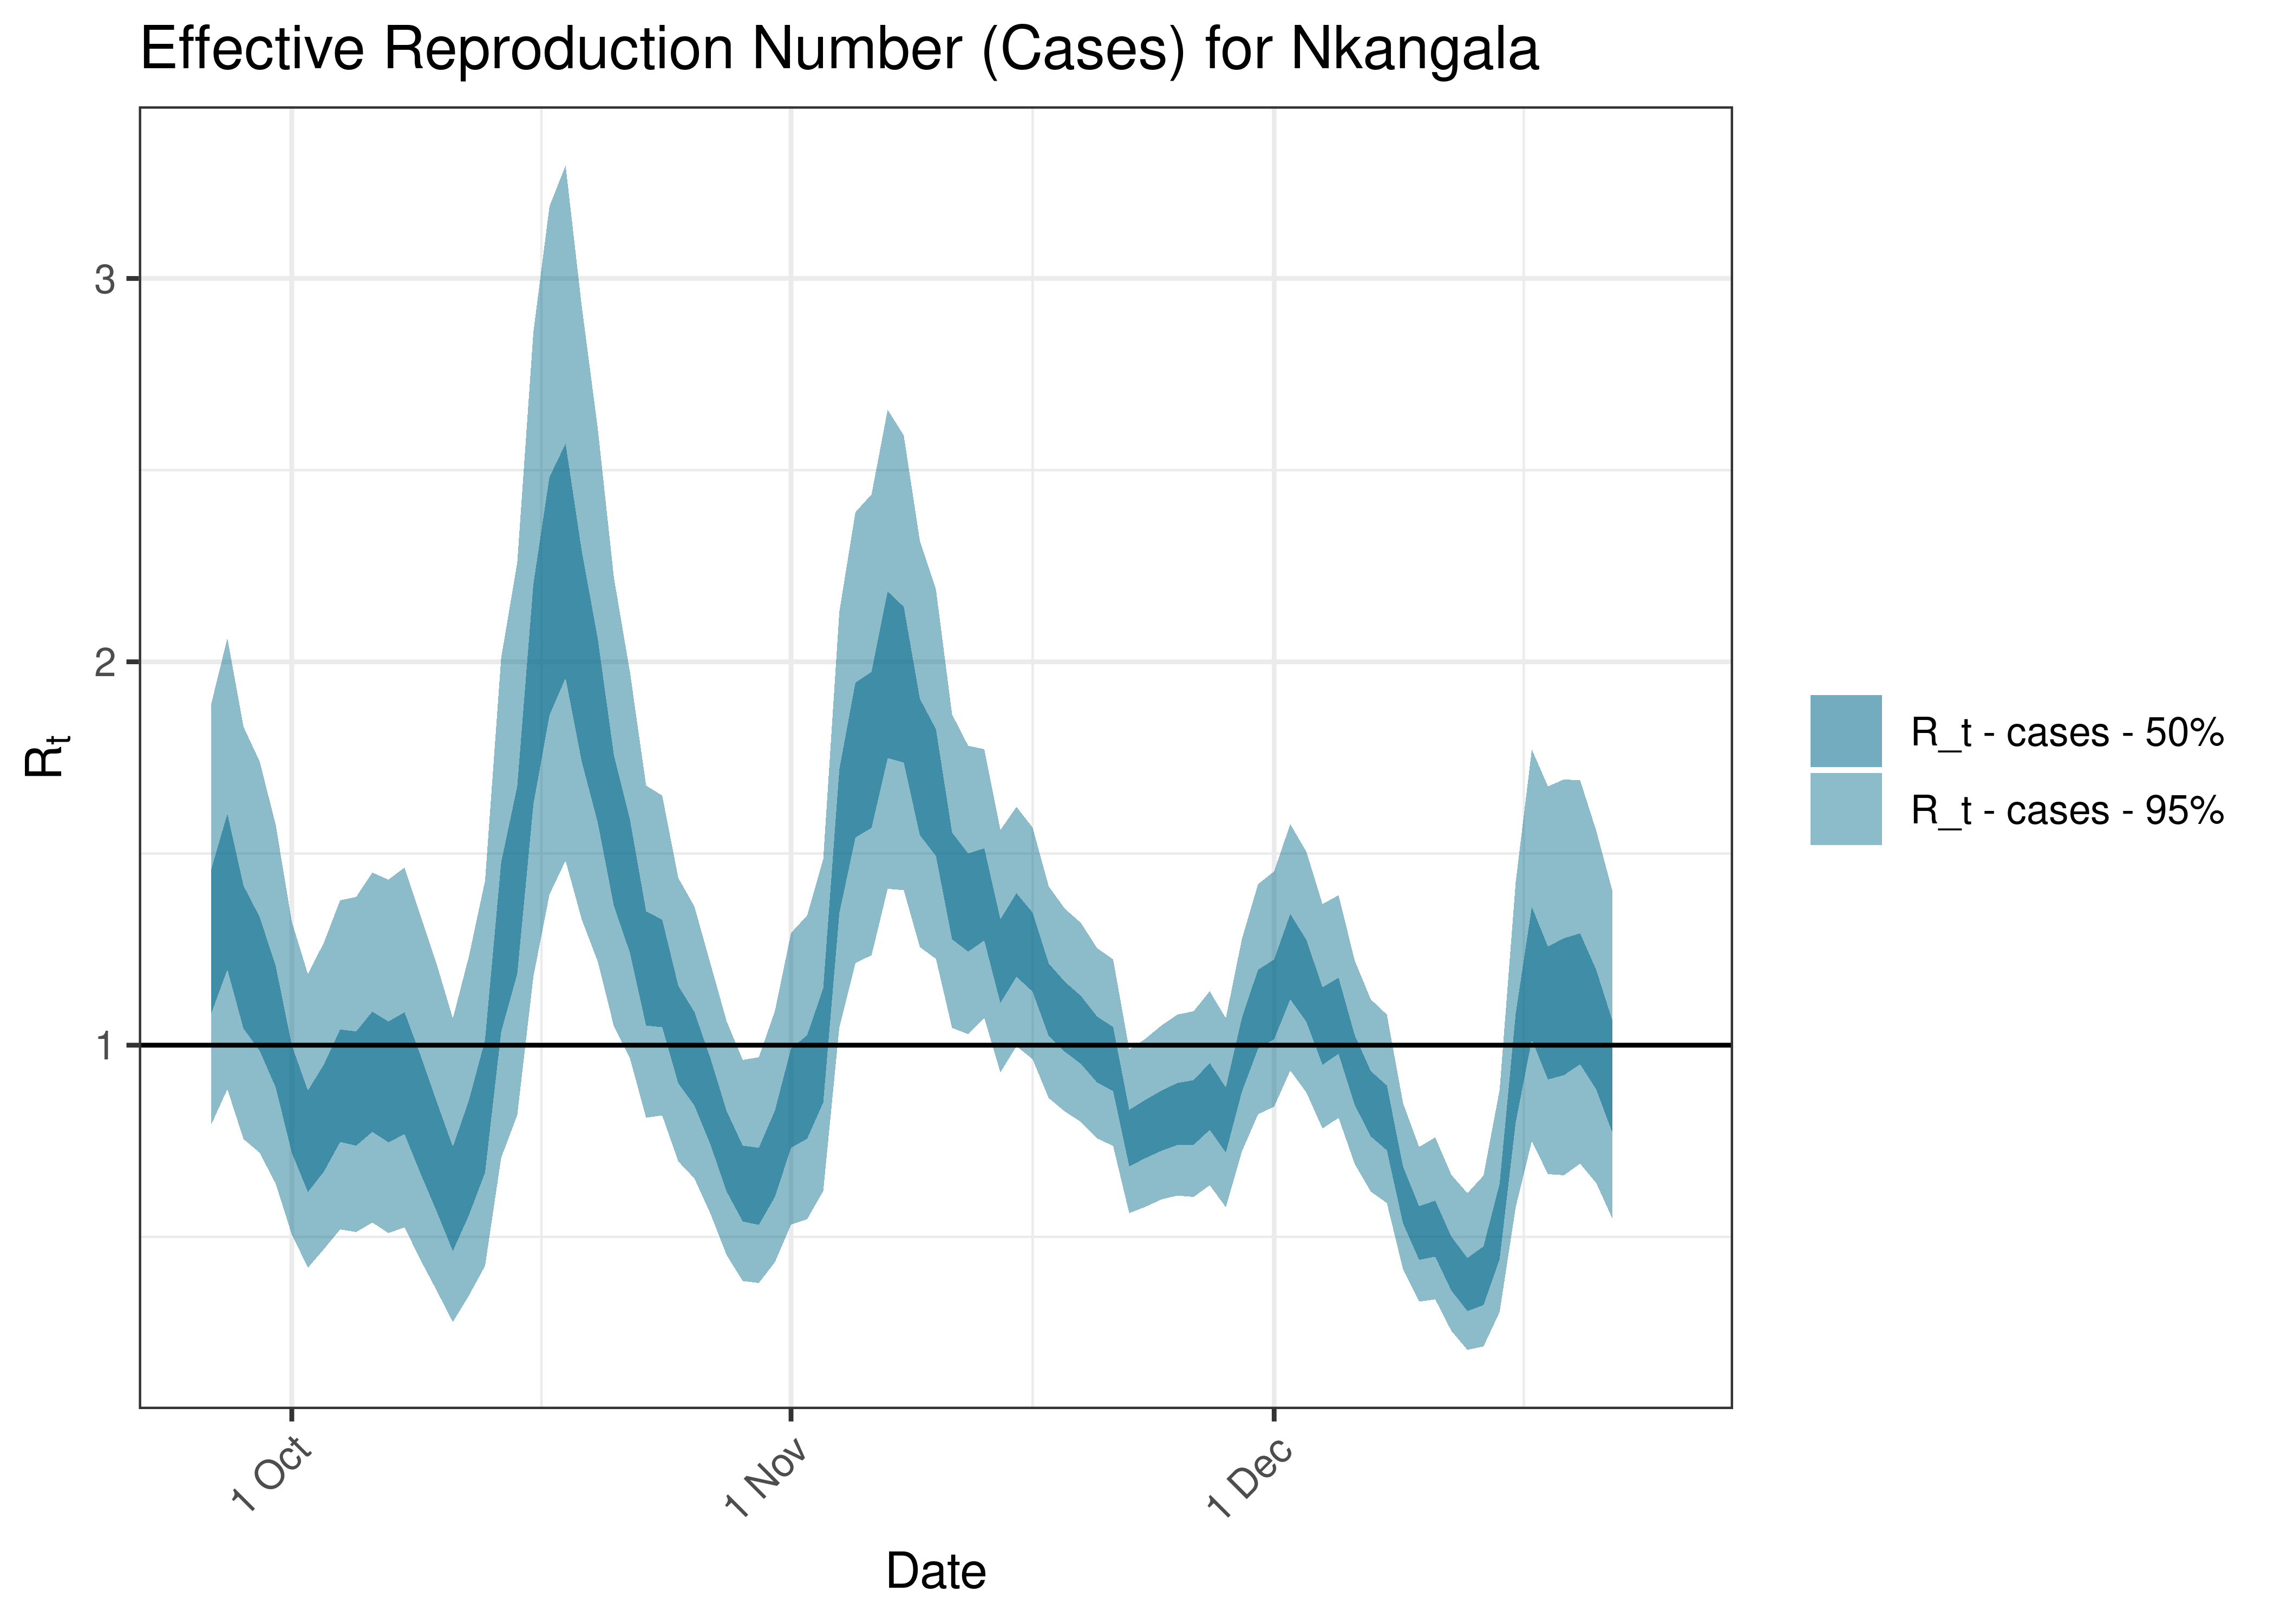 Estimated Effective Reproduction Number Based on Cases for Nkangala over last 90 days